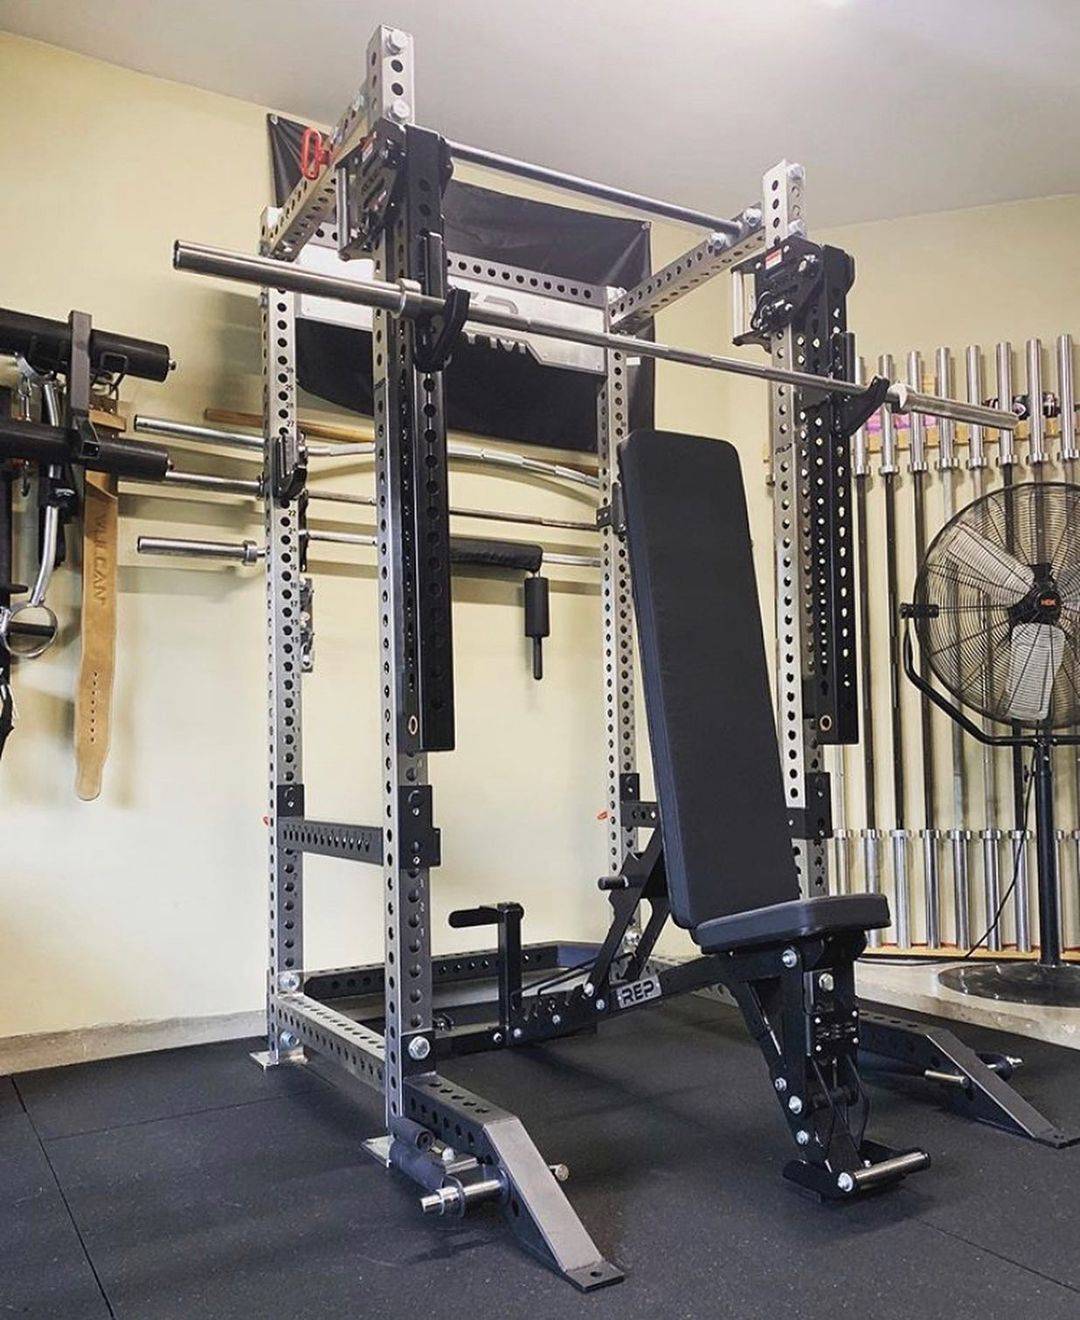 REP AB-4100 Adjustable Weight Bench